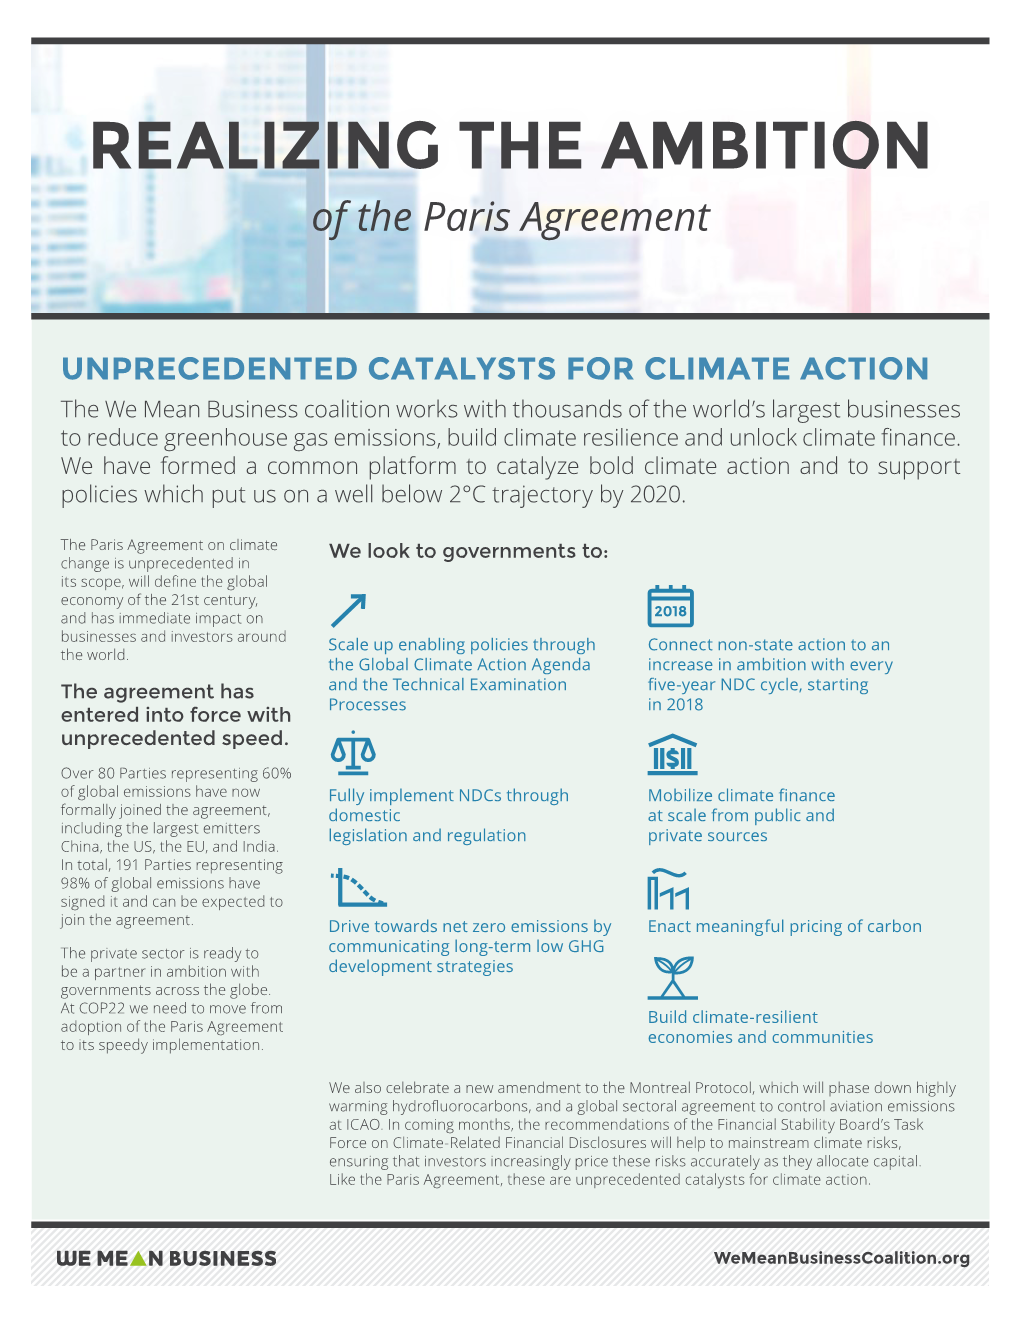 REALIZING the AMBITION of the Paris Agreement